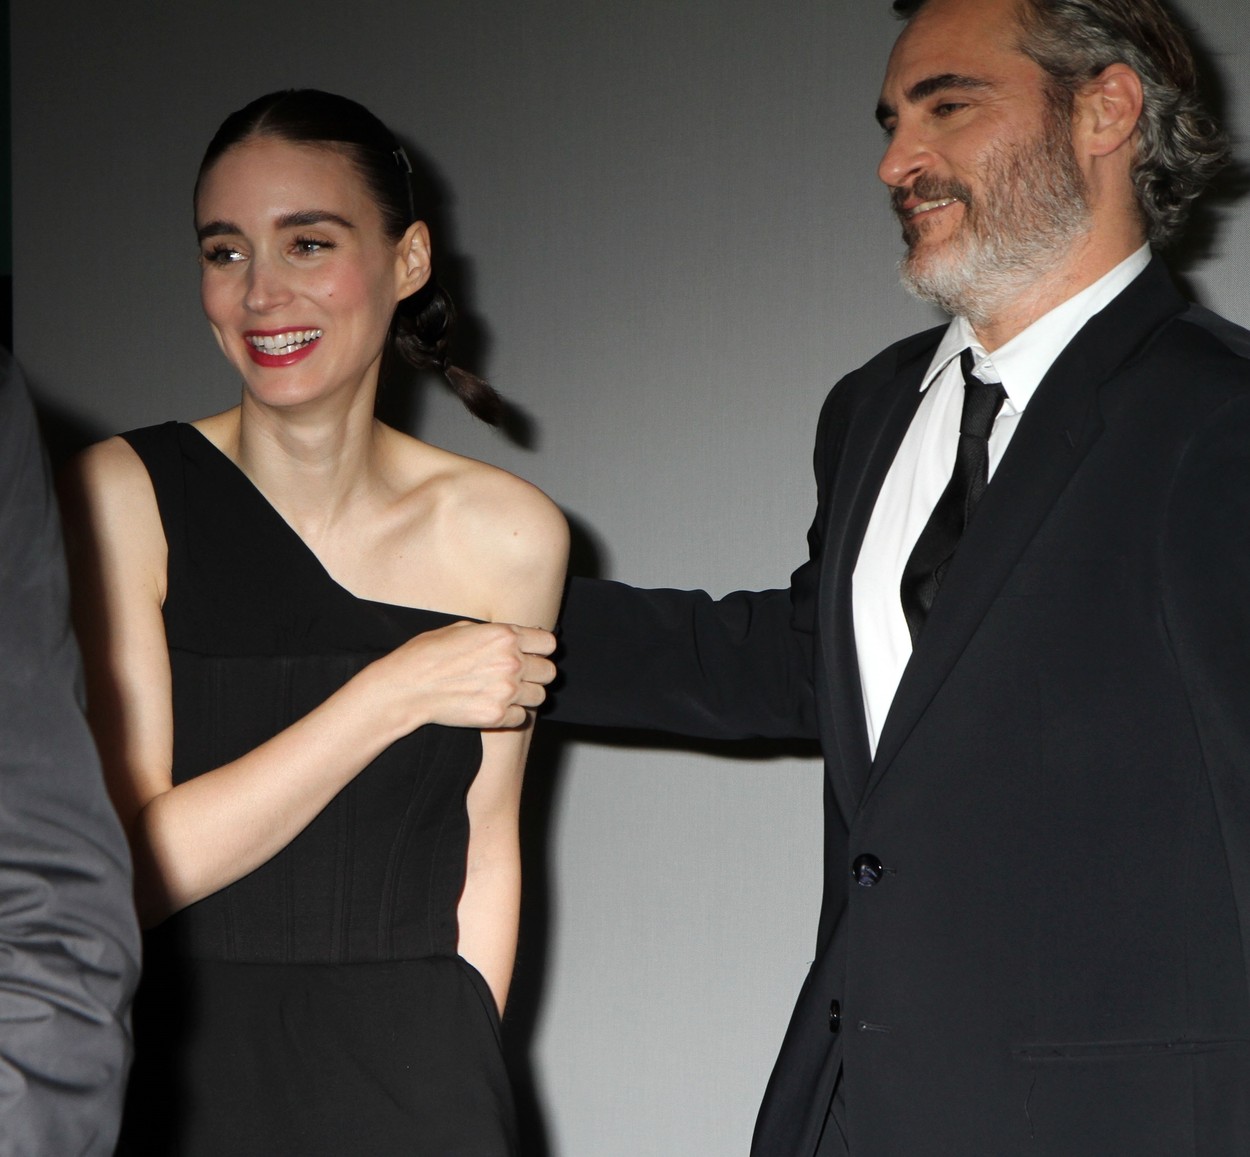 New York, NY  - A rare moment captures lovers Joaquin Phoenix and Rooney Mara together. Both very private, they refused to walk a carpet together at the 'Joker' premiere in NYC. Also NOT allowed were any TV press.

BACKGRID USA 2 OCTOBER 2019, Image: 474924988, License: Rights-managed, Restrictions: I have NOT marked this as exclusive....but I got these shots OFF the carpet. I want them to go out but others on the carpet did not get these, Model Release: no, Credit line: Diane Cohen / BACKGRID / Backgrid USA / Profimedia